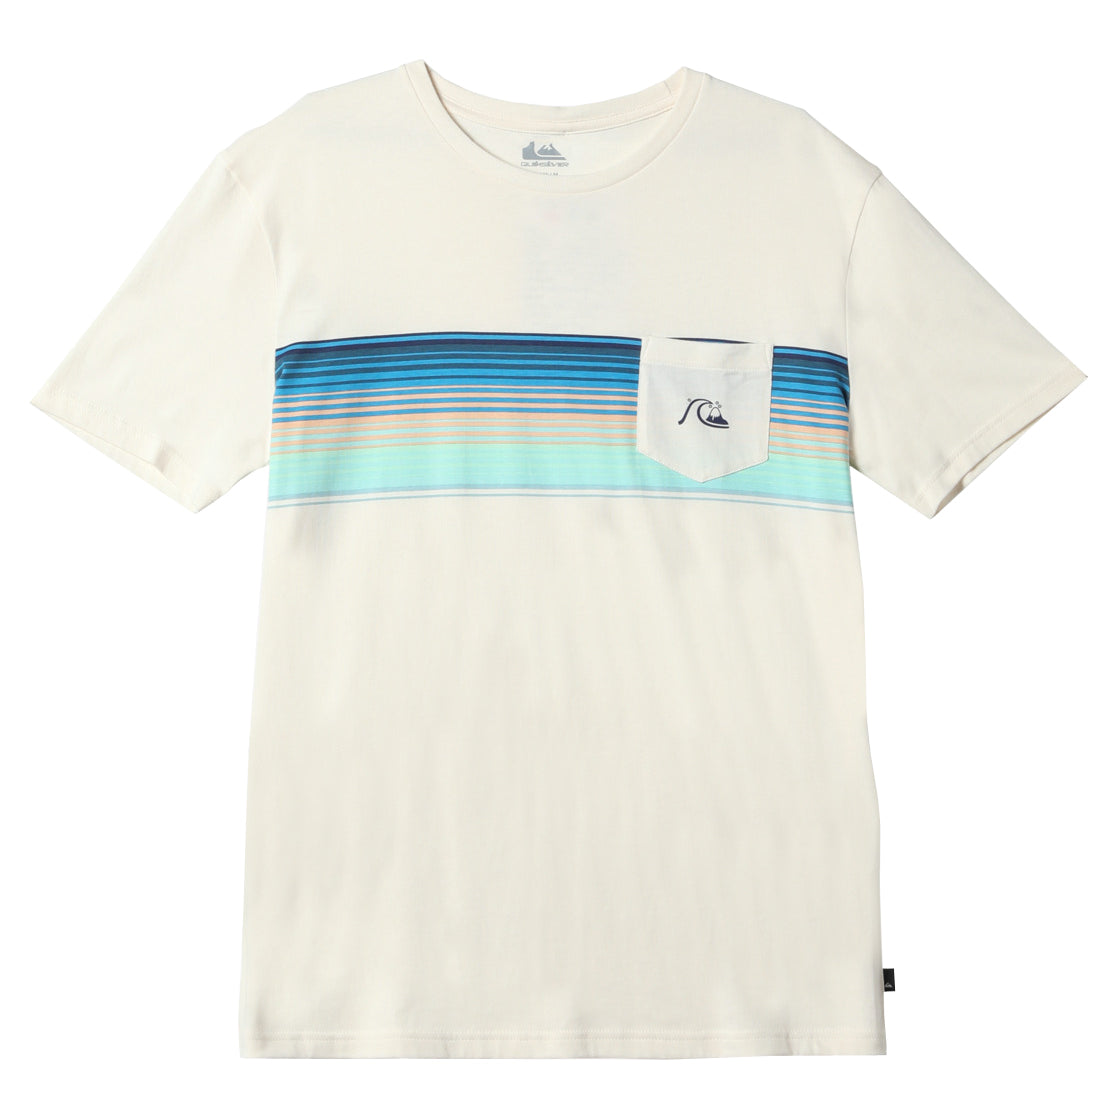 Quiksilver Swell Vision Striped Pocket Tee WBY0 S